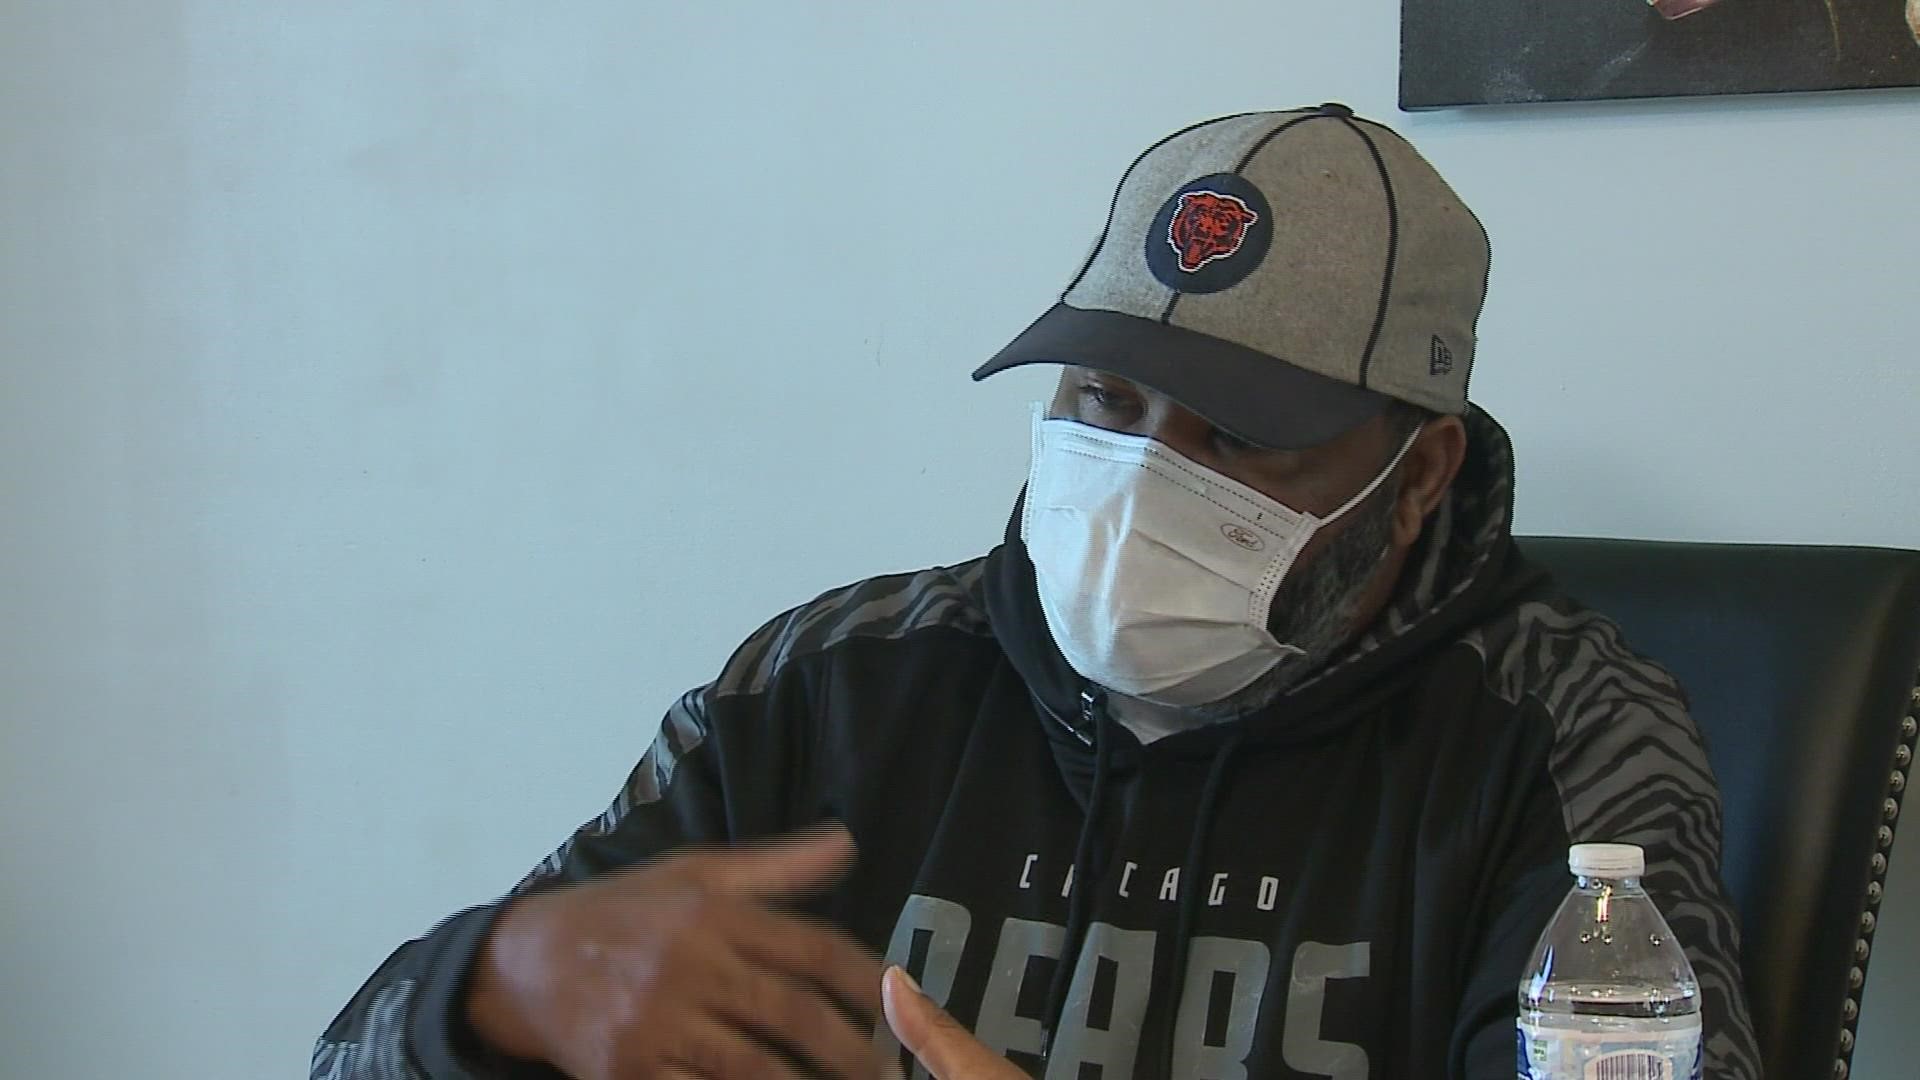 Marcus Edwards went to a Chicago bears game in 2019 with a sign asking for a new kidney hoping to get on TV. Two years later, he got his wish.